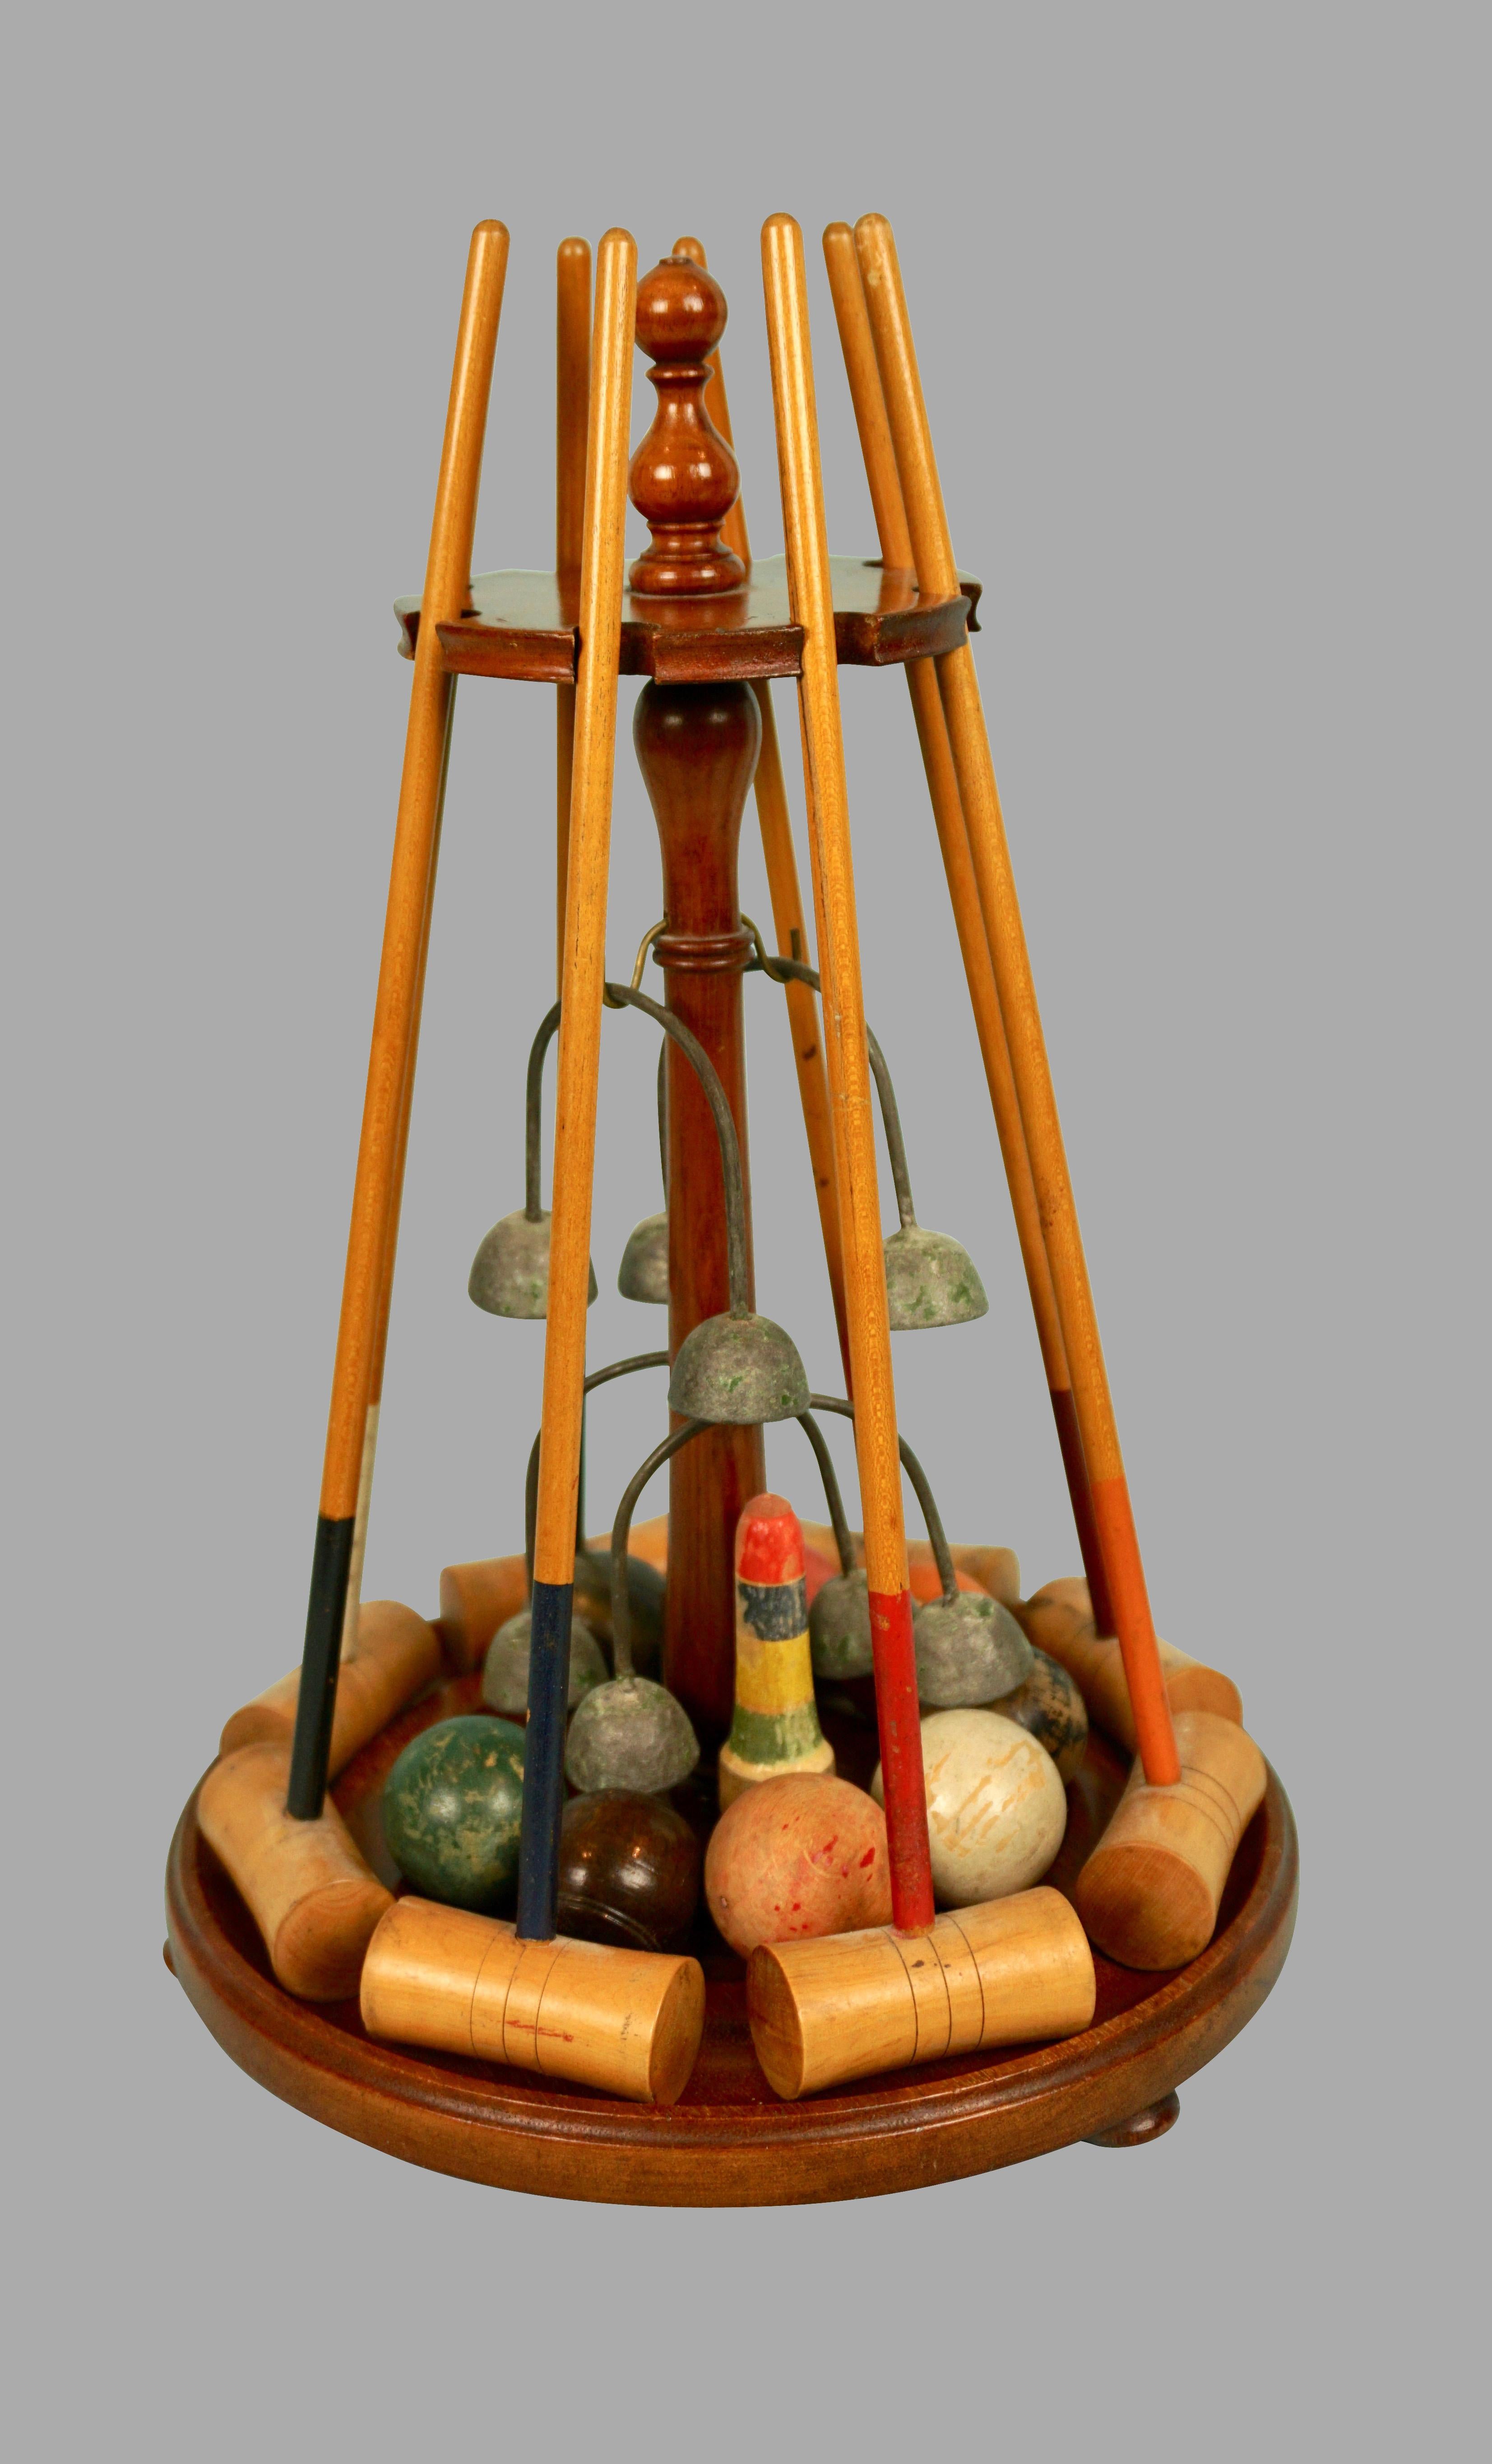 A wonderful antique miniature croquet set consisting of multiple mallets, wickets and balls, all mounted on a beautifully made mahogany rack. A charming and unusual piece of English whimsical craft. Some elements lacking. Circa 1900.